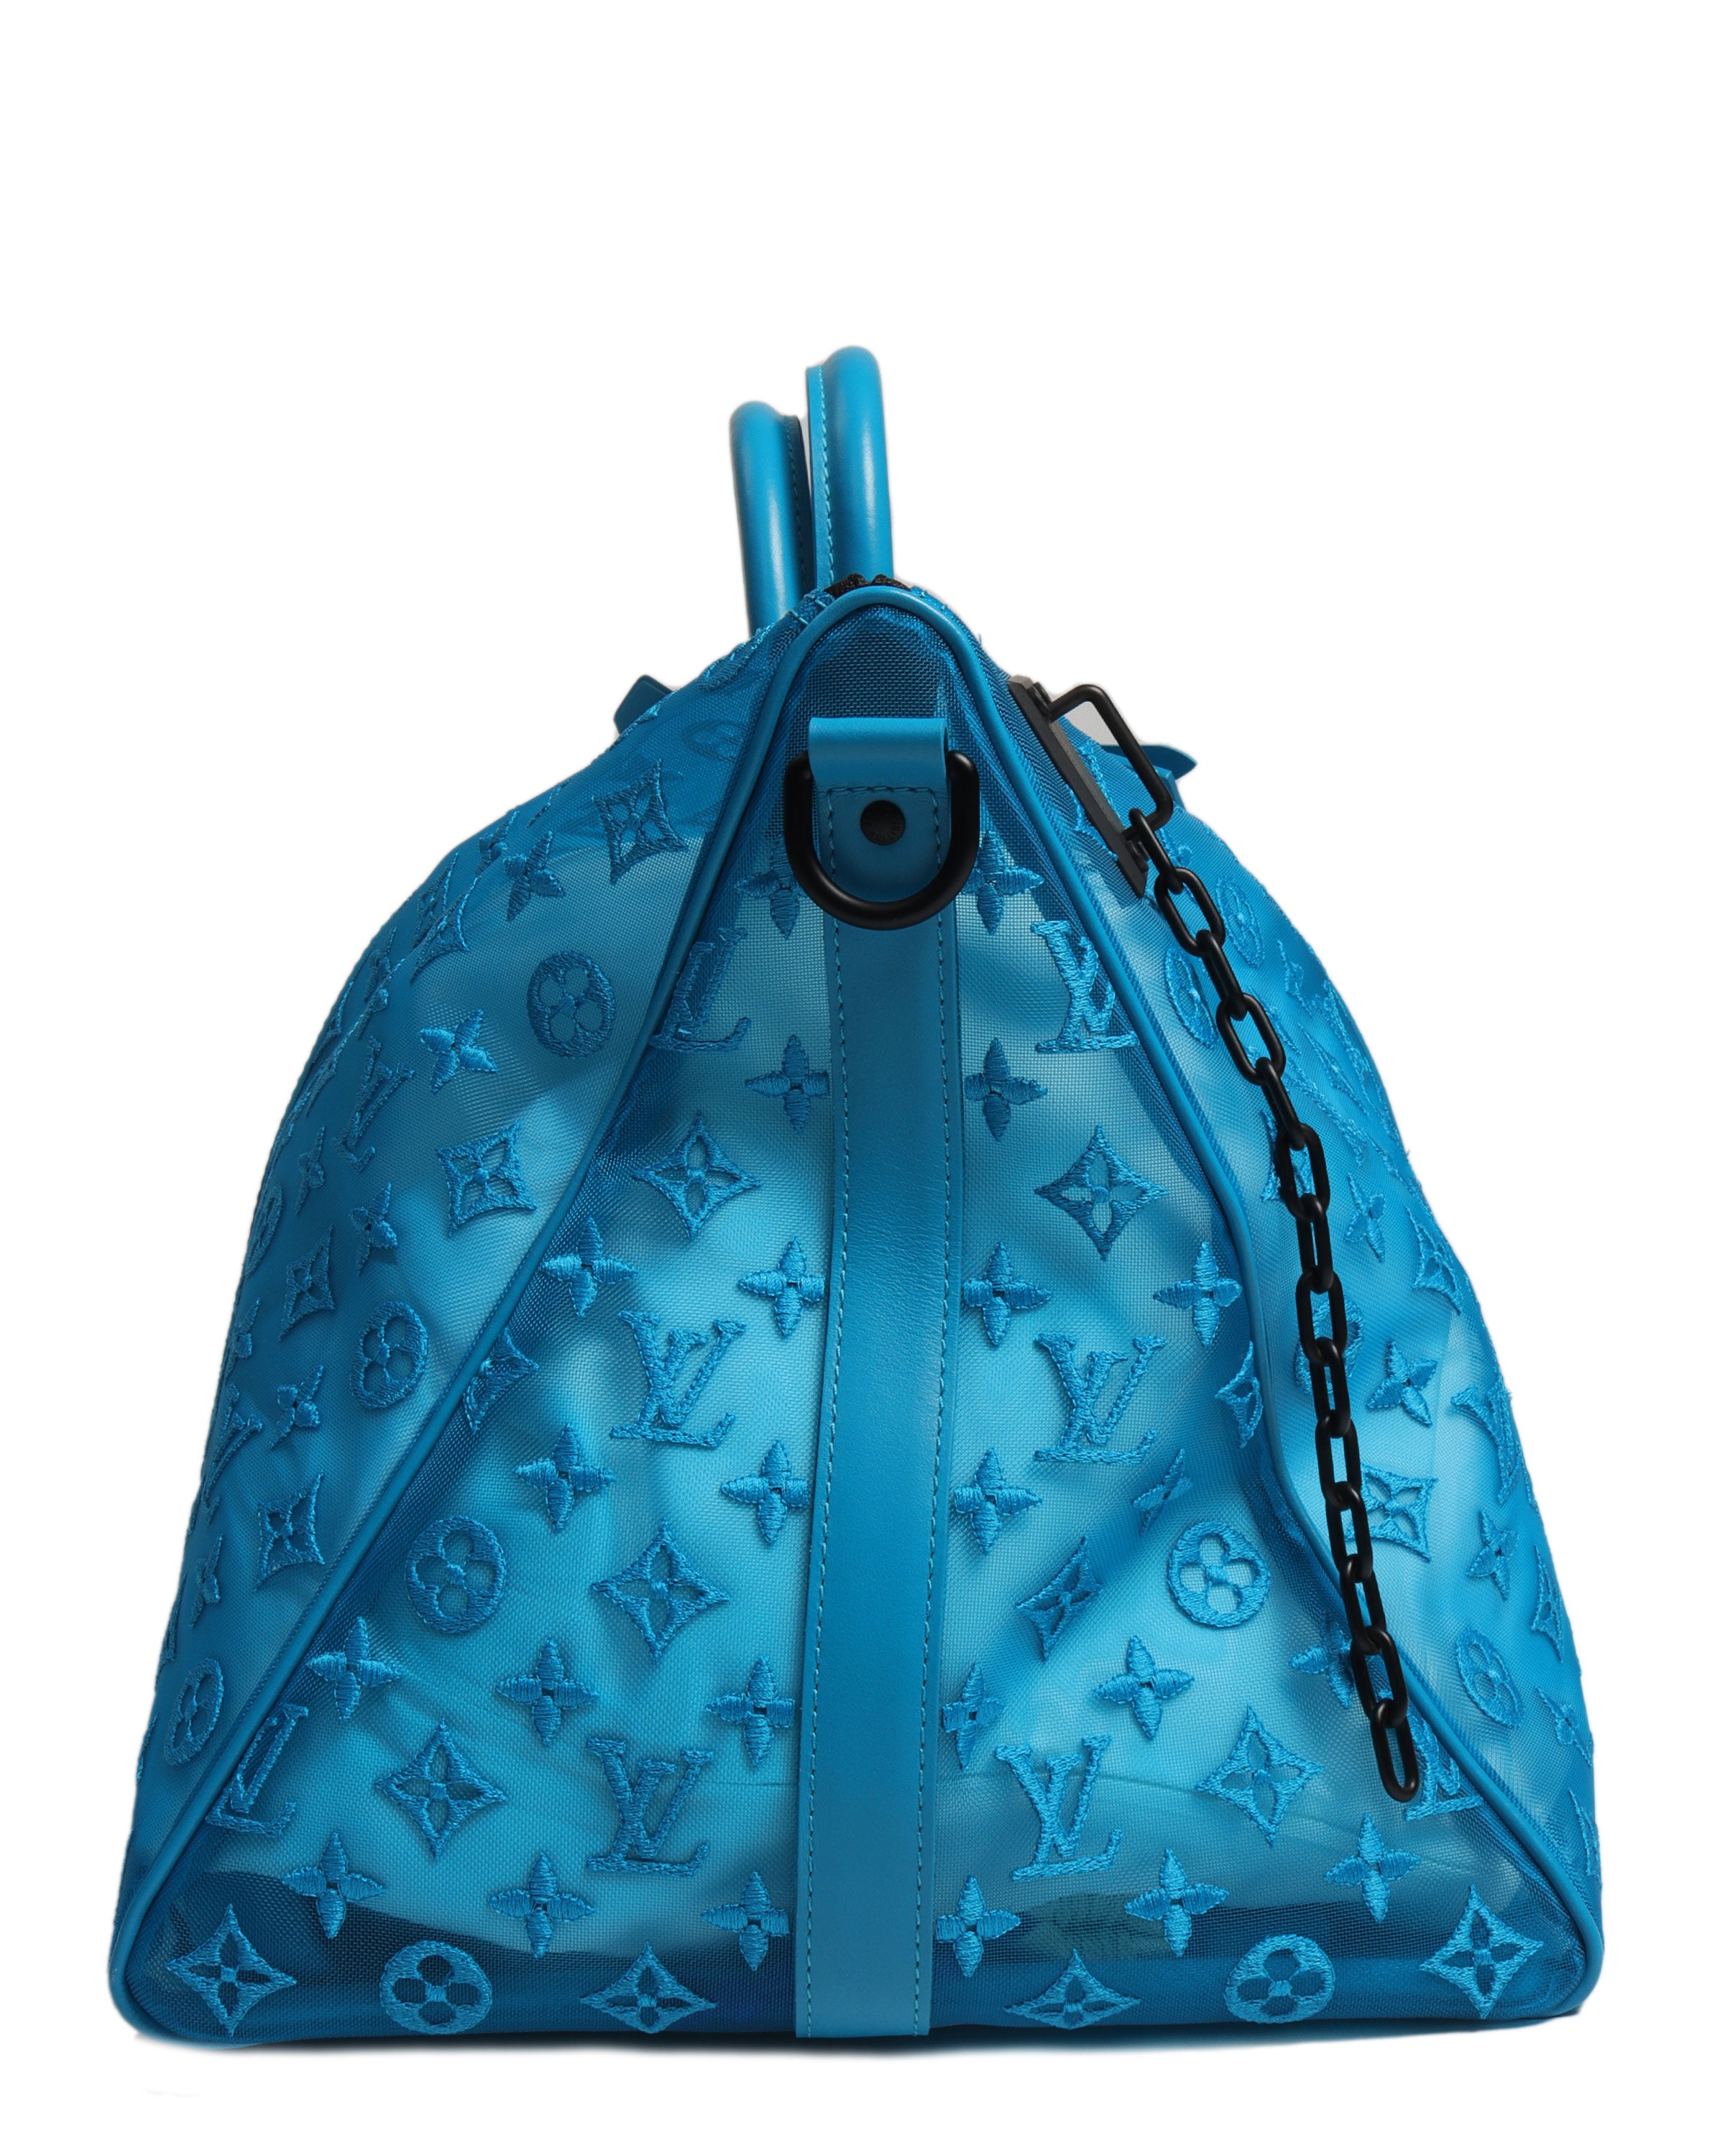 Mr Money - Any LV bag lovers out there? Would you rock the new Louis Vuitton  Keepall Triangle Bandoulière 50? Made with see-through mesh in a summery  turquoise hue with an embroidered